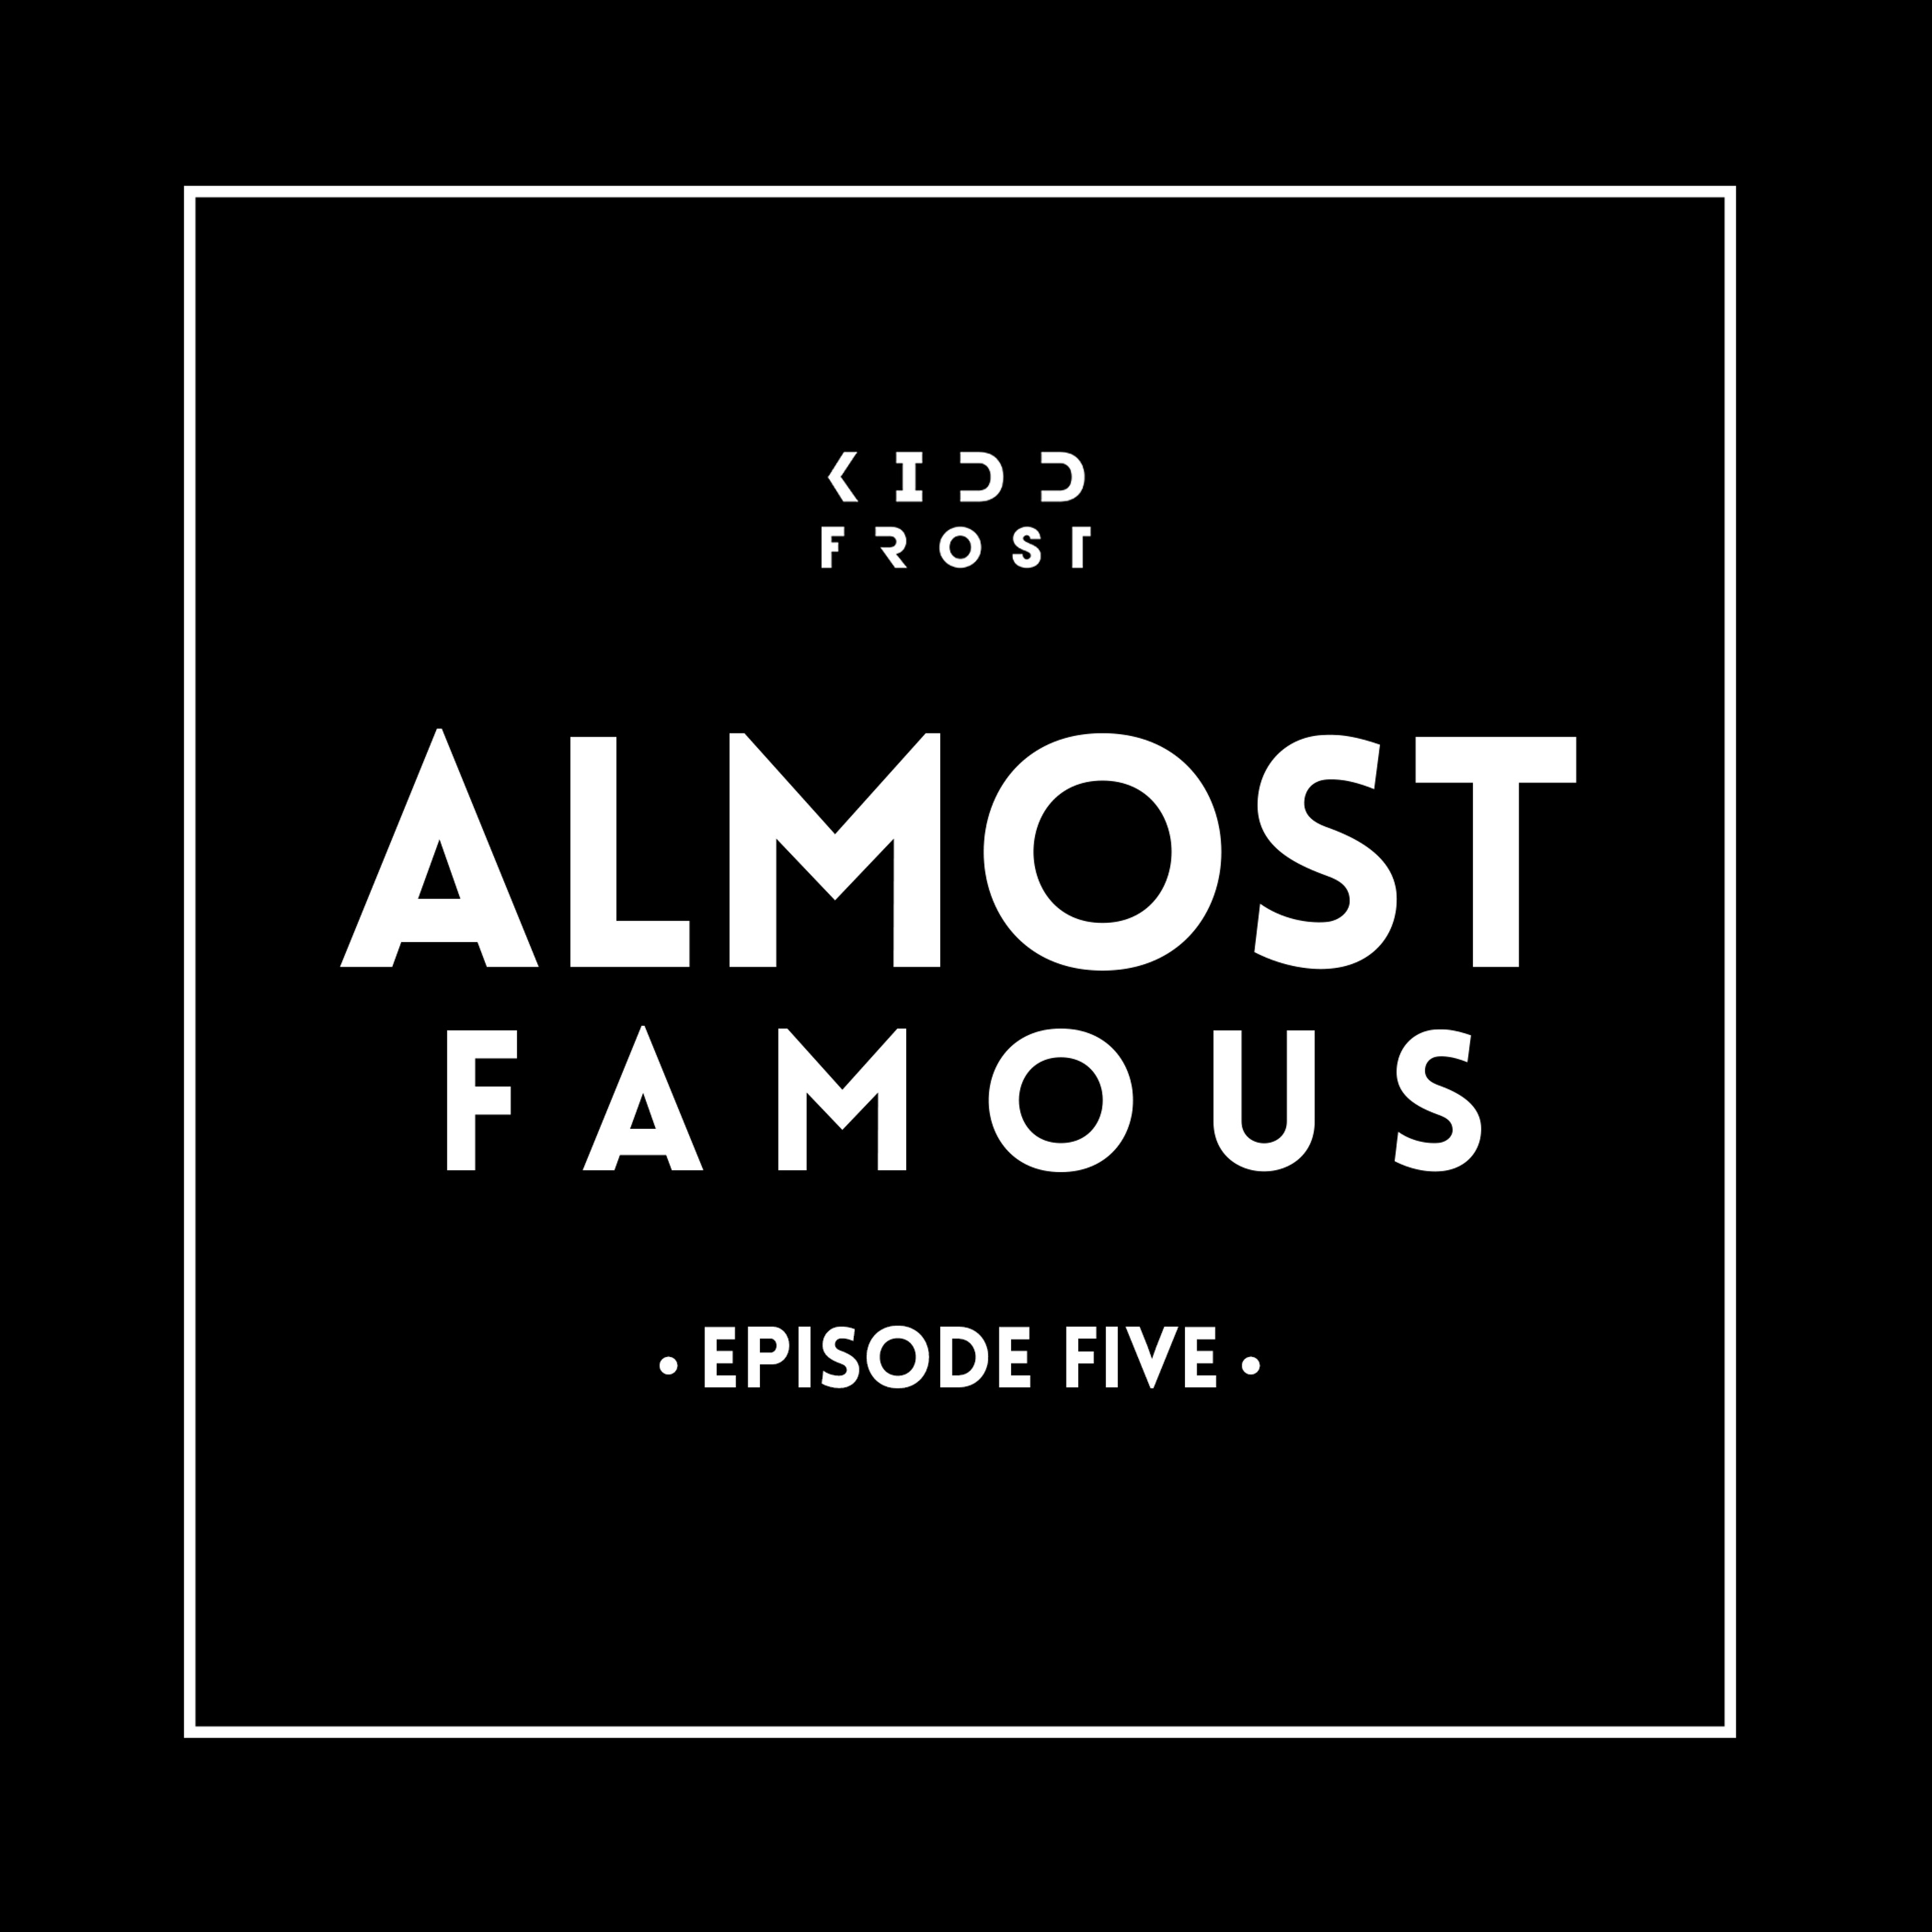 Almost Famous (Episode Five)